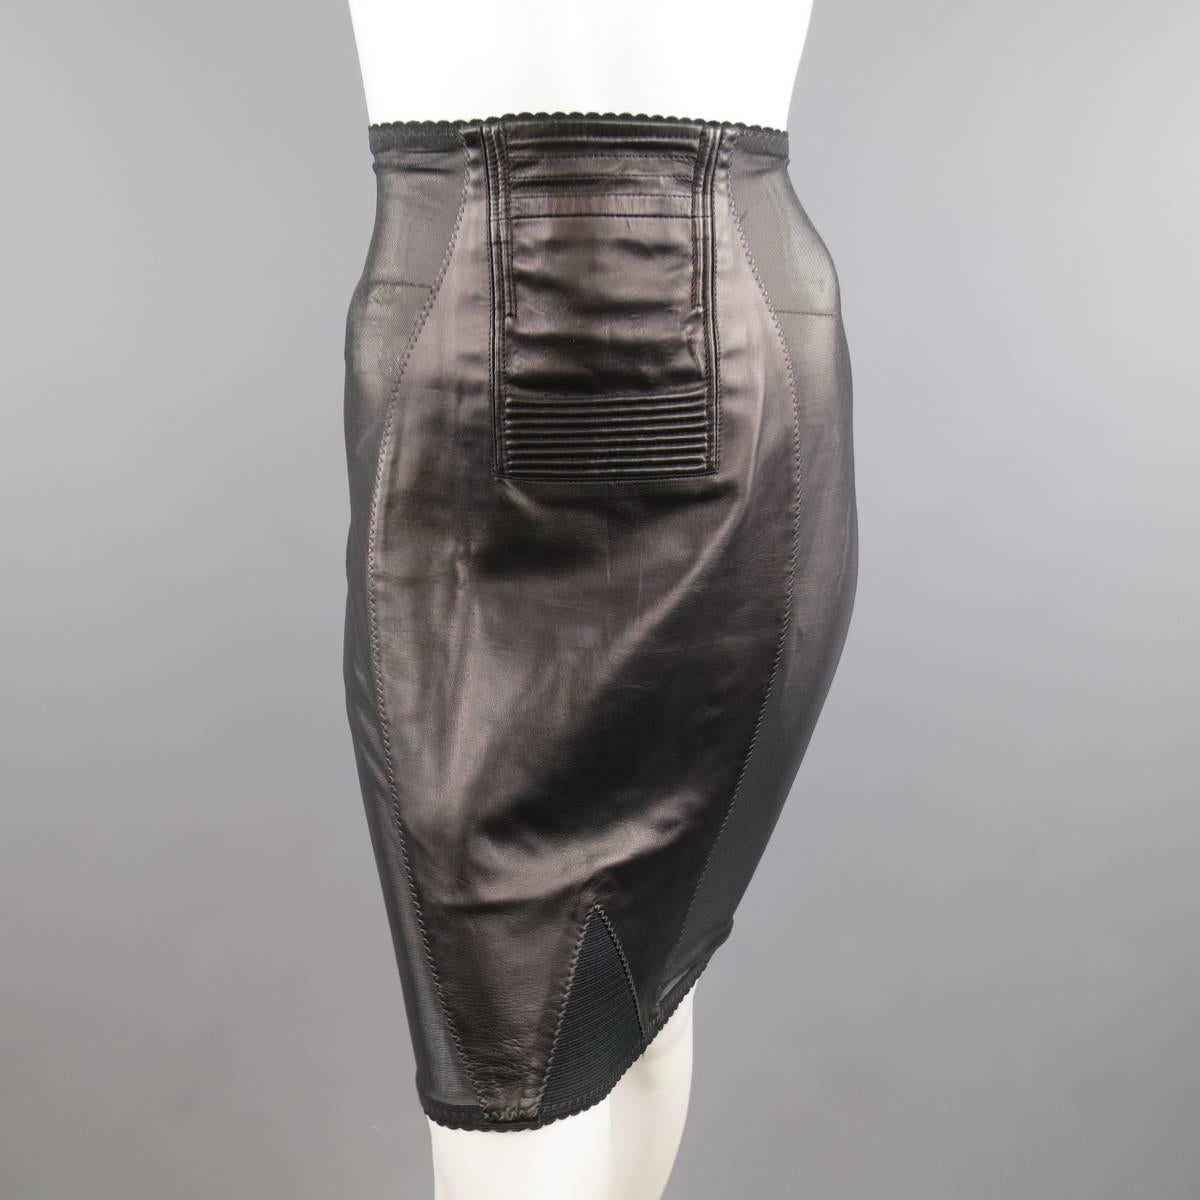 Fabulous vintage JEAN PAUL GAULTIER pencil skirt designed in the style of a retro lingerie girdle features a detailed leather center, triangular stretch panel, and see-through stretch micro-mesh side panels. Minor wear throughout. Made in Italy.
